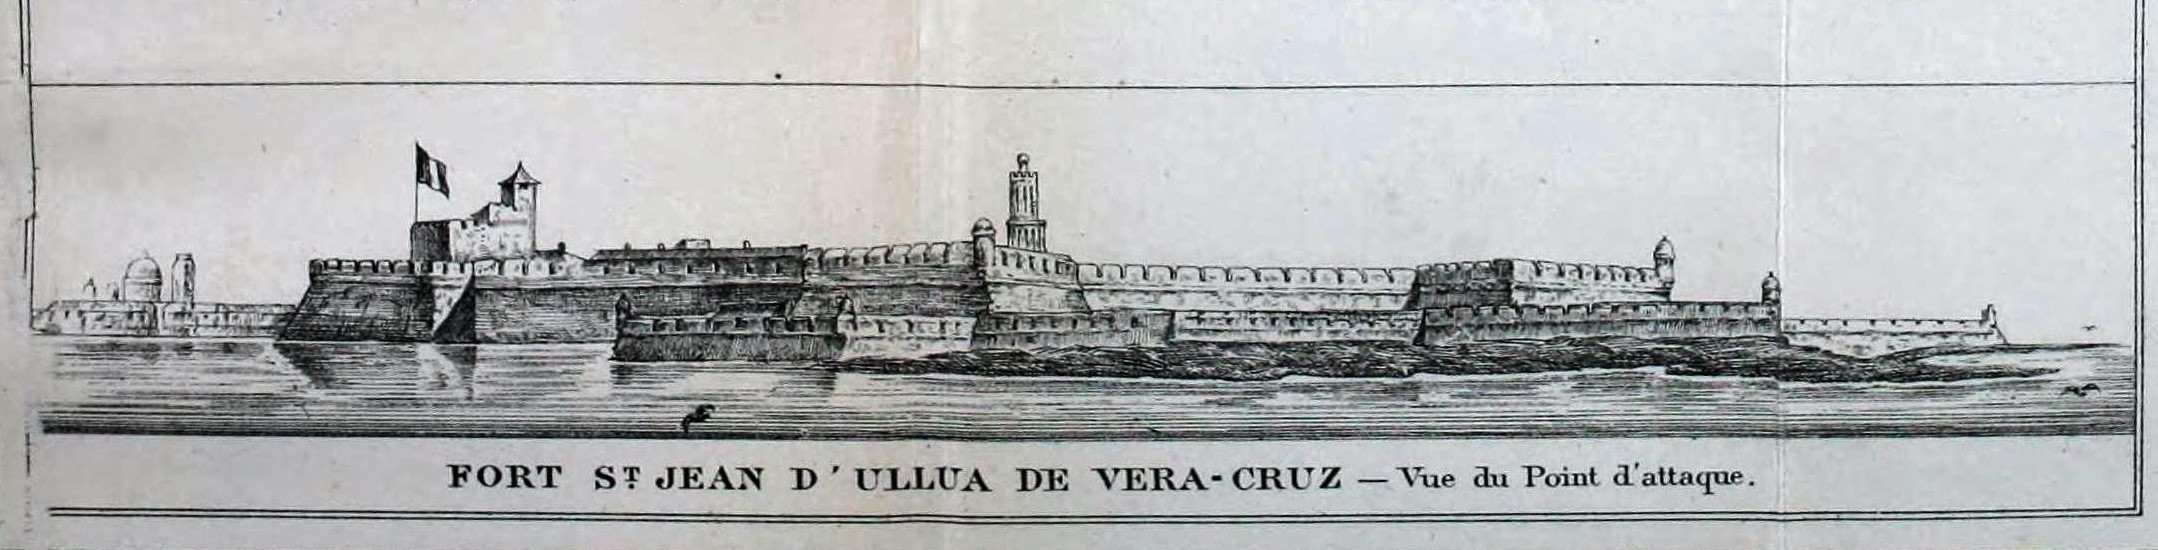 Panoramic view of San Juan de Ulúa in 1838 from a French map.